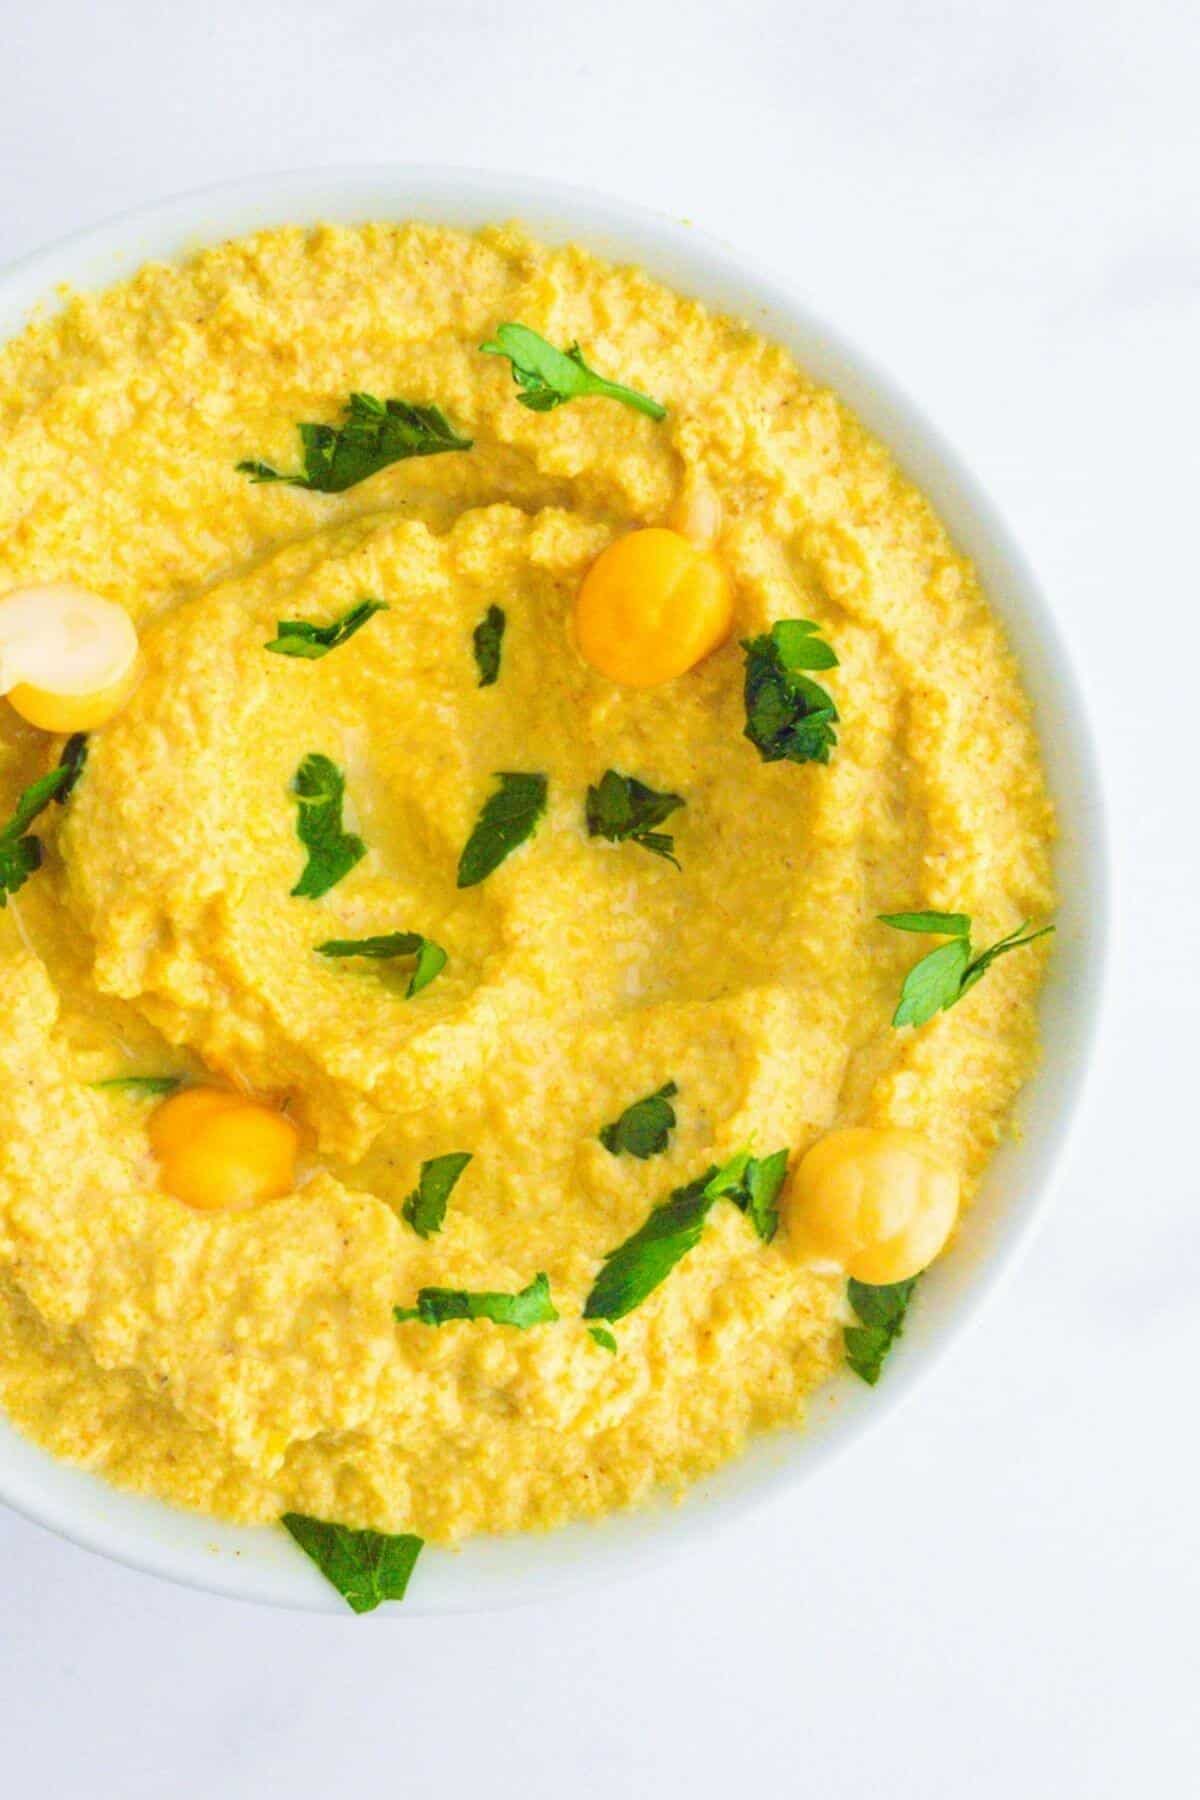 A small bowl filled with yellow hummus, sprinkled with fresh herbs.